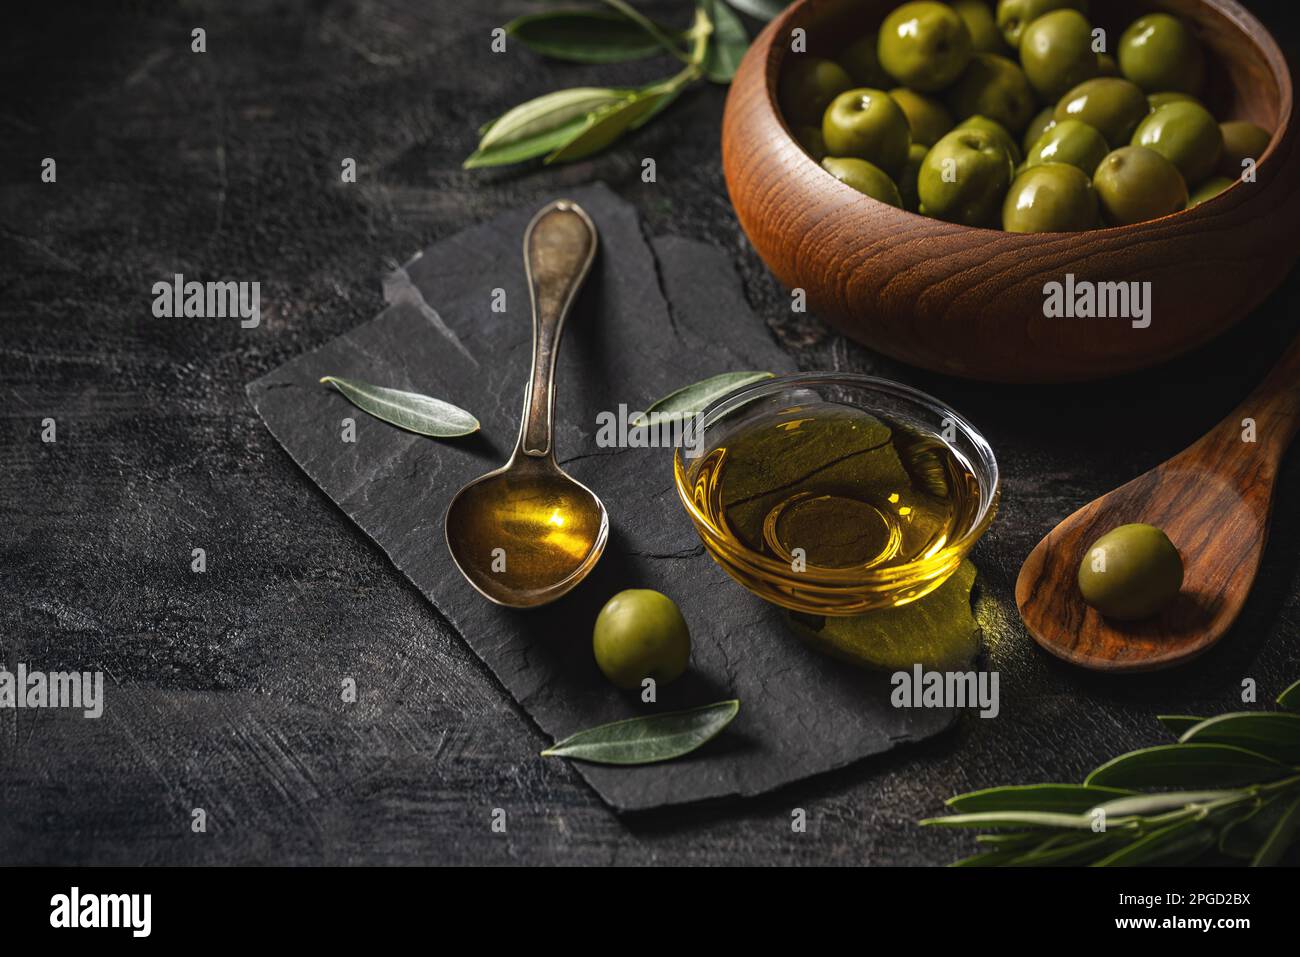 Mediterranean food concept with olives and extra virgin olive oil on black slate background Stock Photo